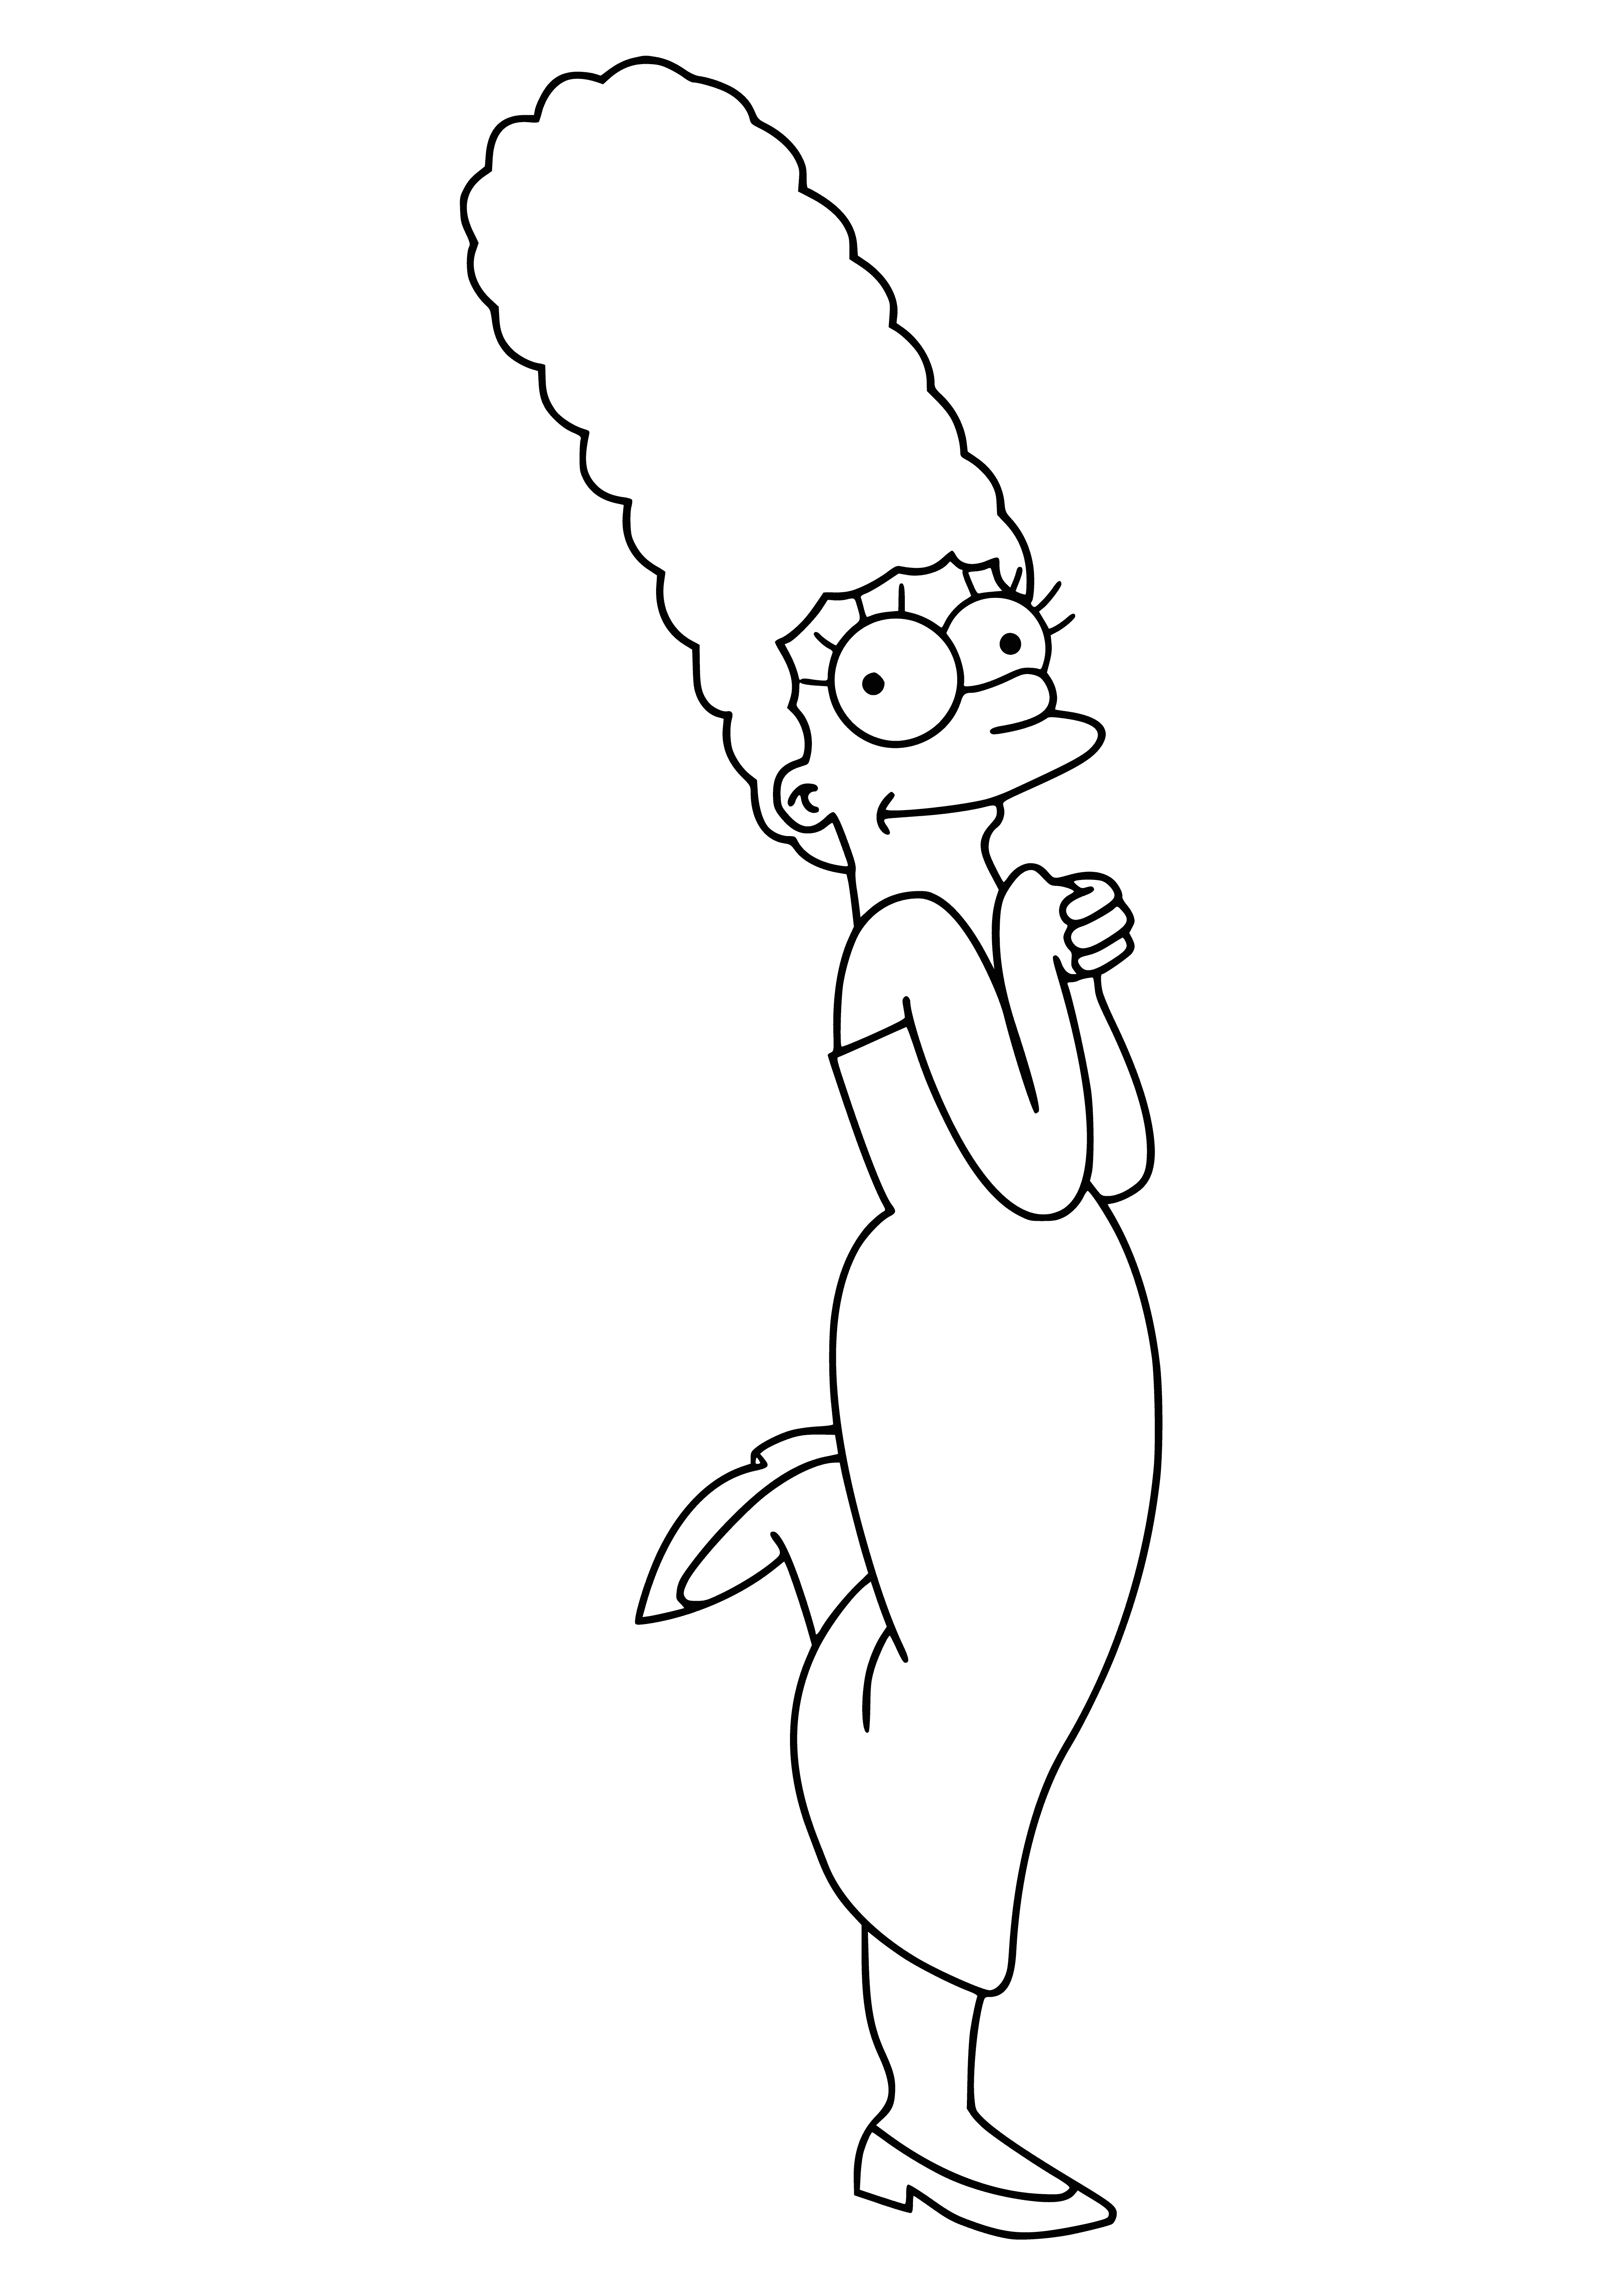 Marge Simpson coloring page